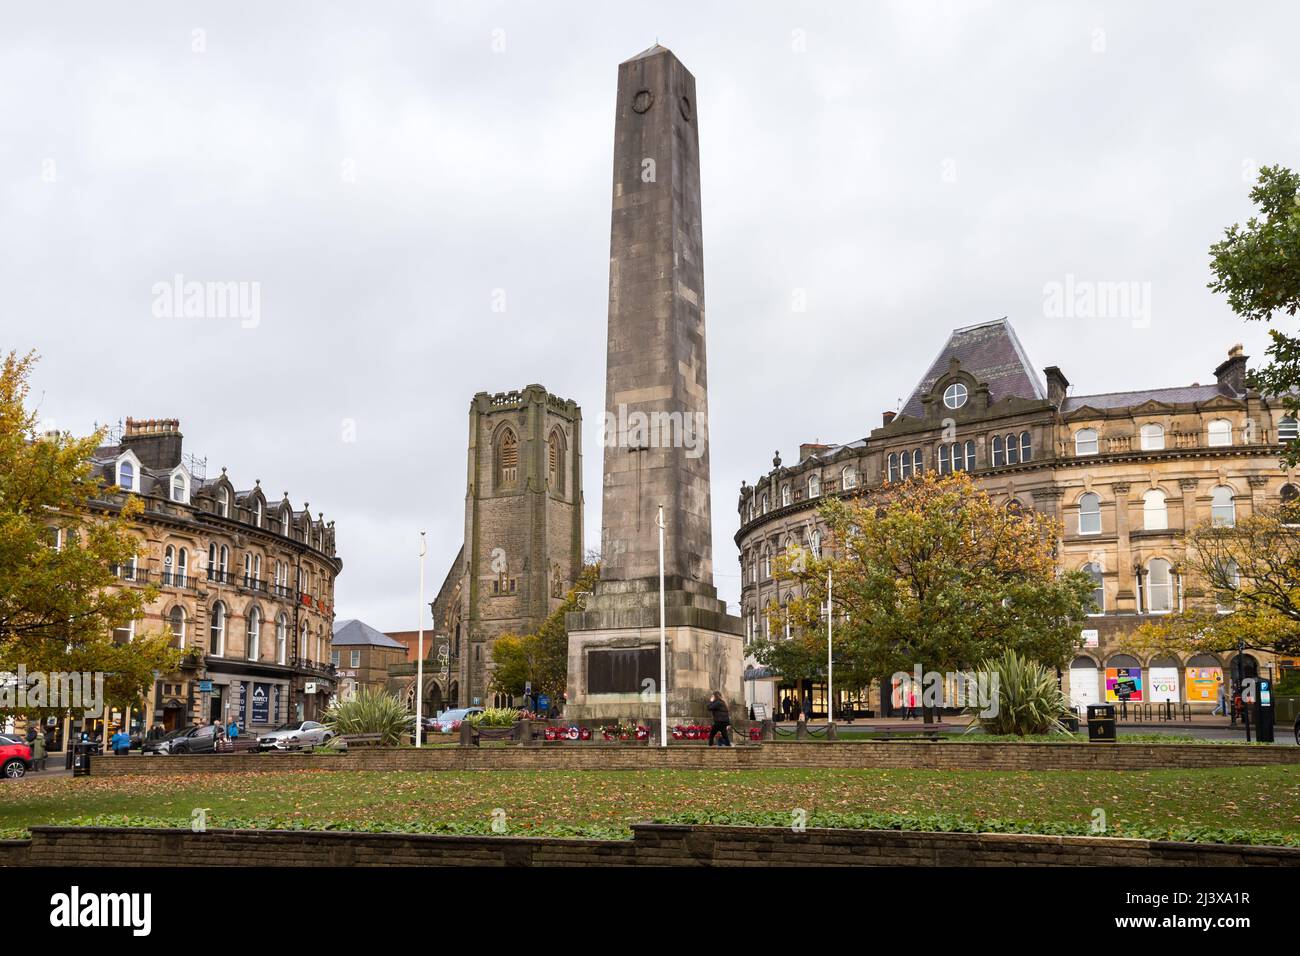 Cenotaph and St Peter's Church in Harrogate Stock Photo